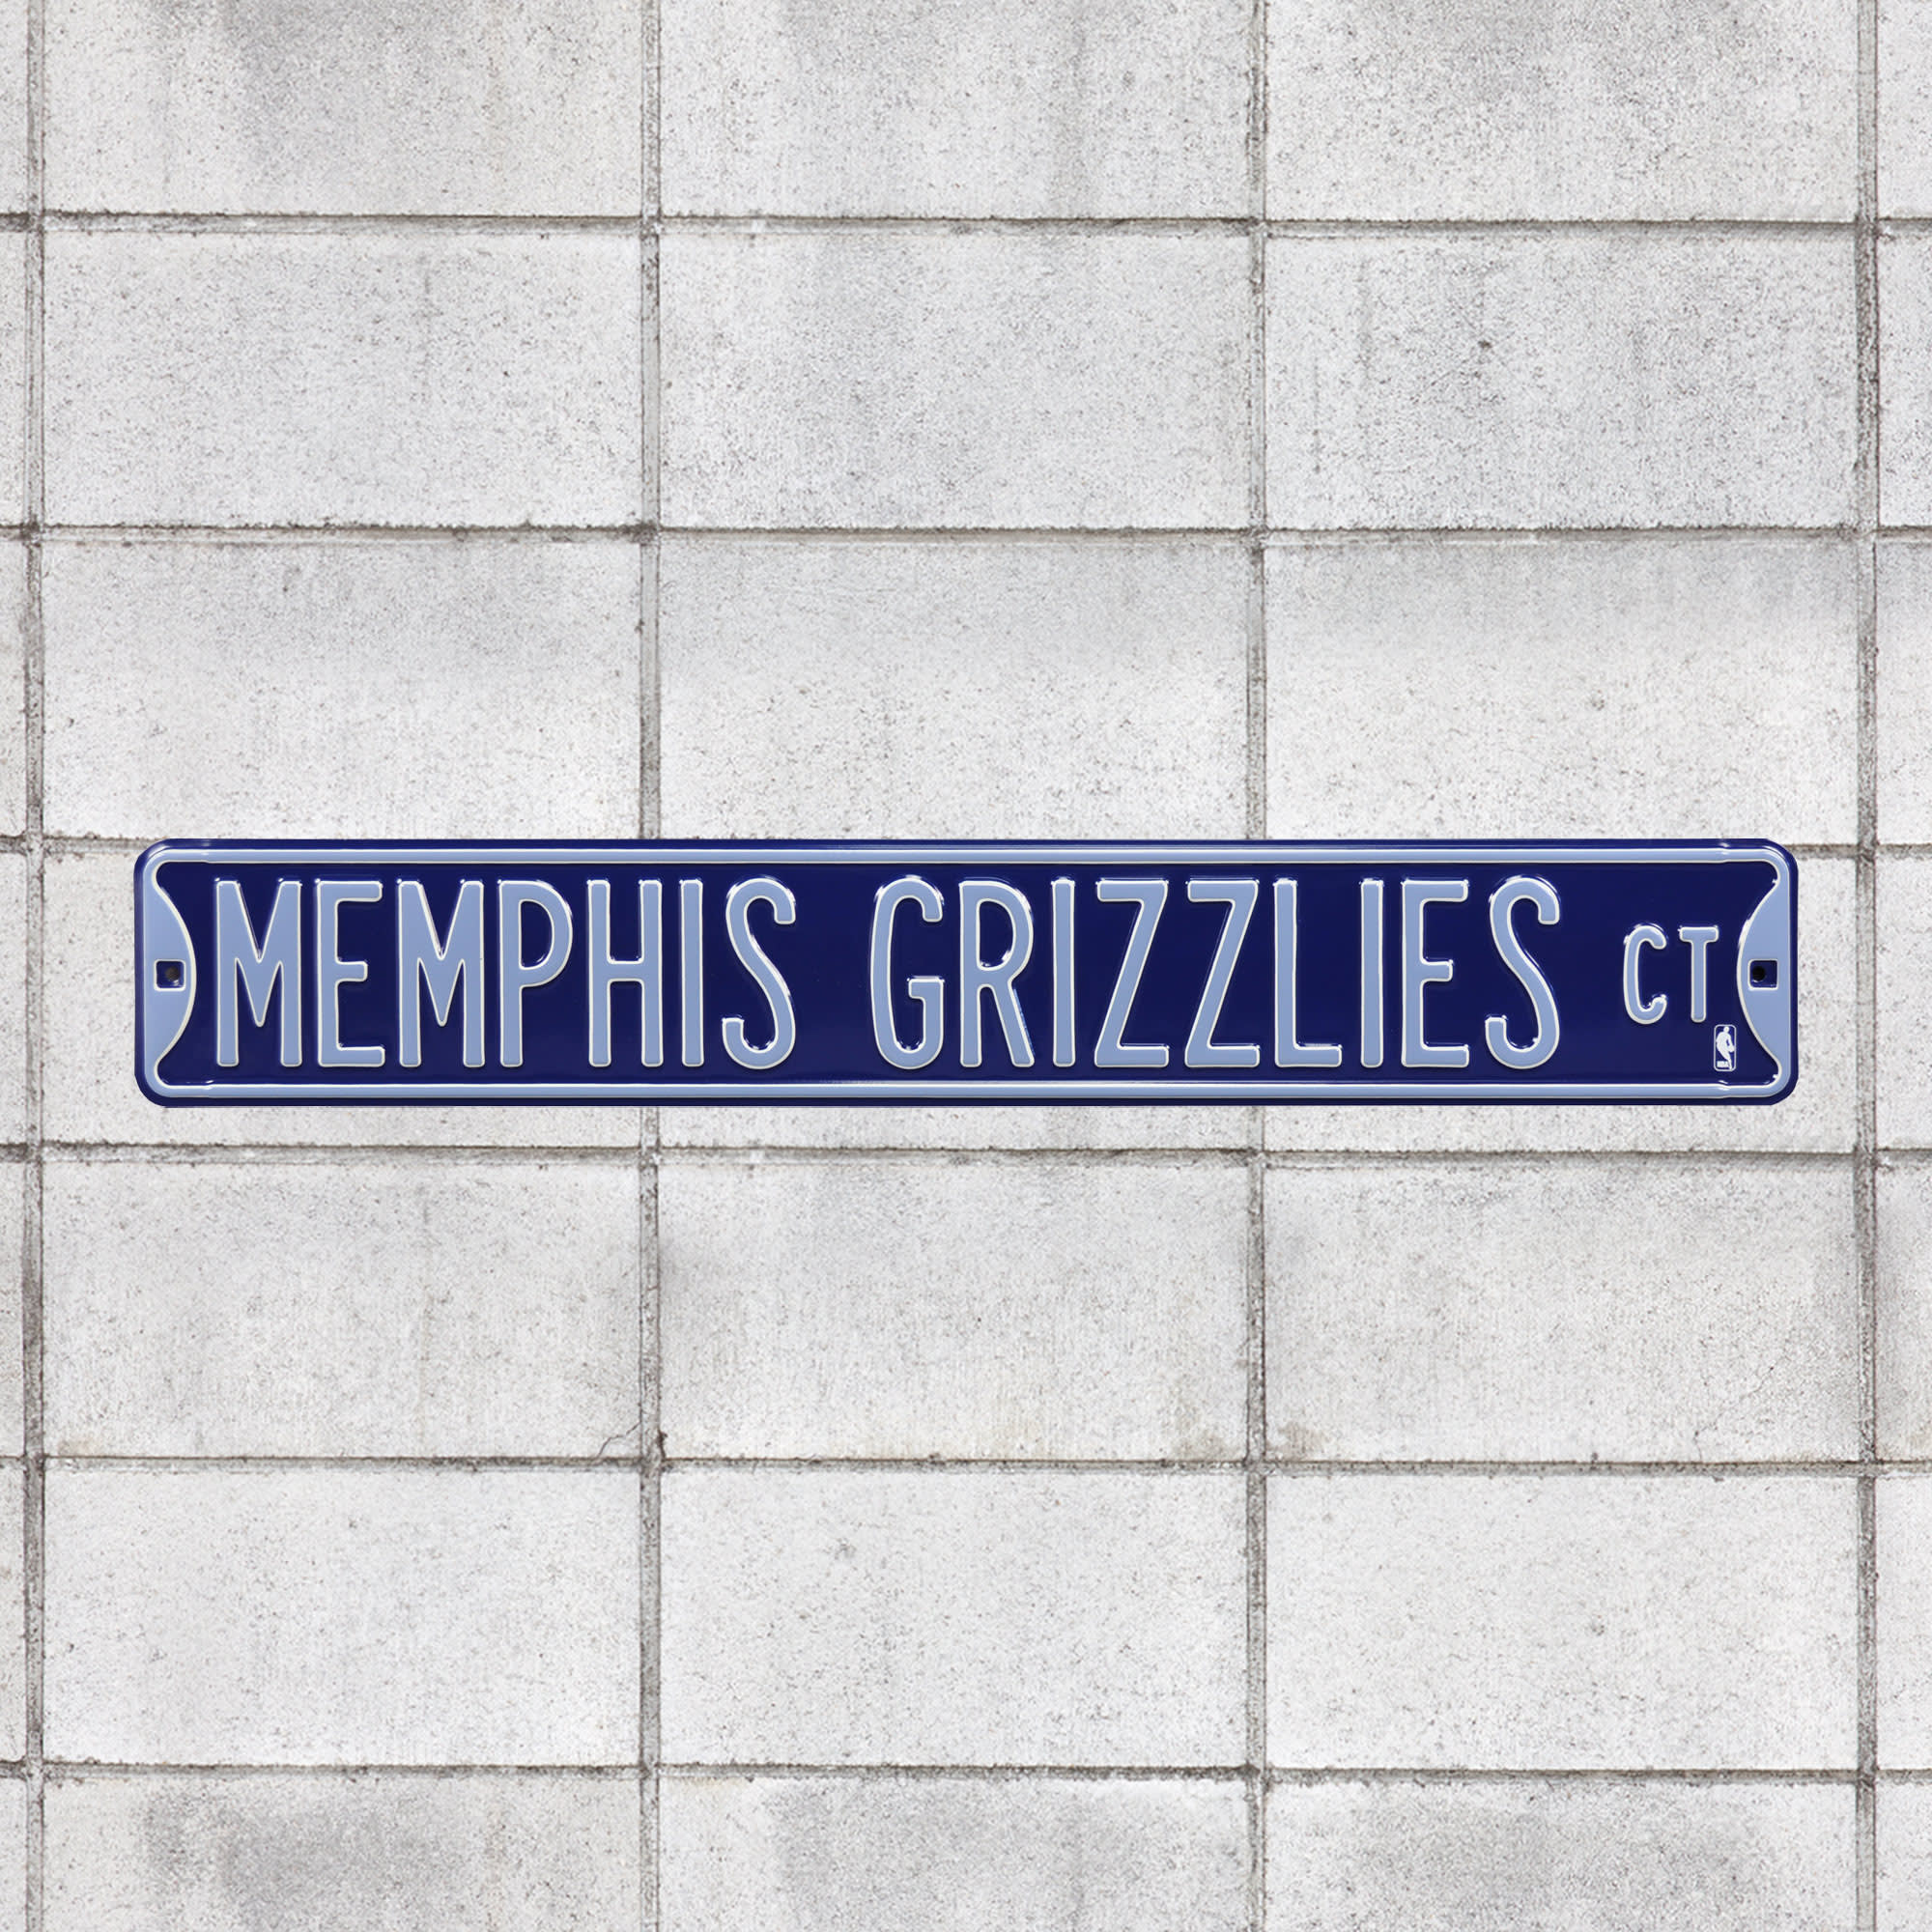 Memphis Grizzlies: Court - Officially Licensed NBA Metal Street Sign 36.0"W x 6.0"H by Fathead | 100% Steel